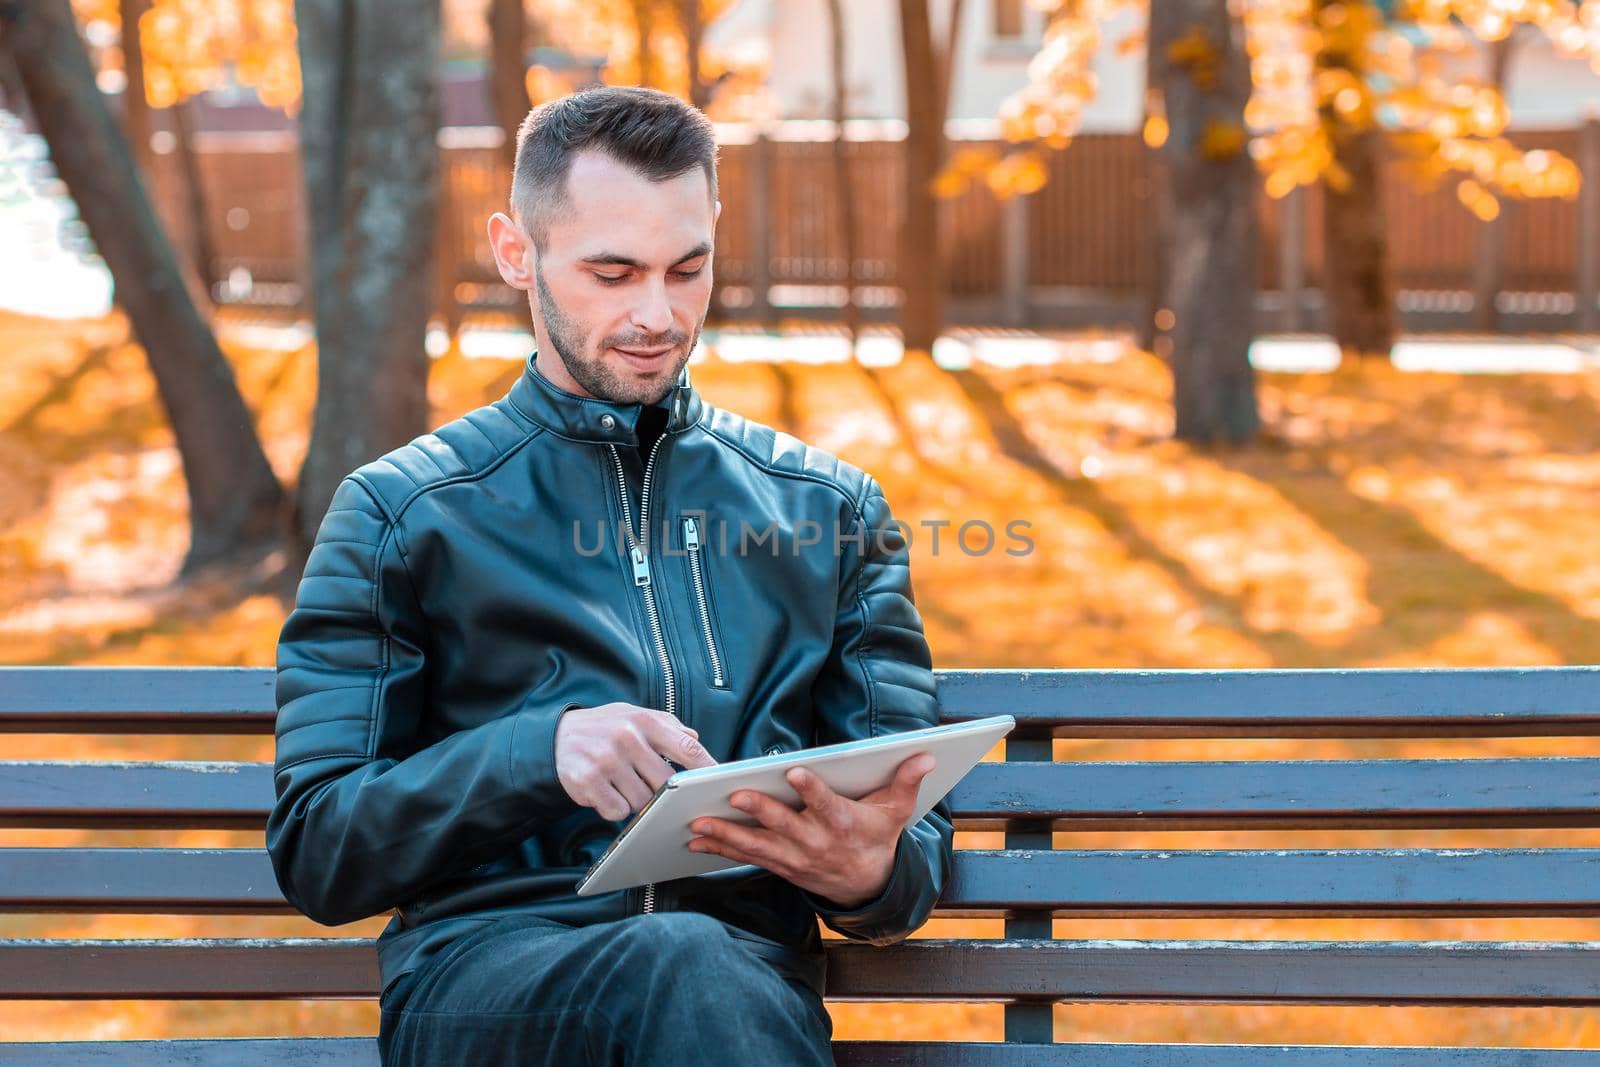 Youthful Guy Sitting on the Bench with Tablet PC by InfinitumProdux